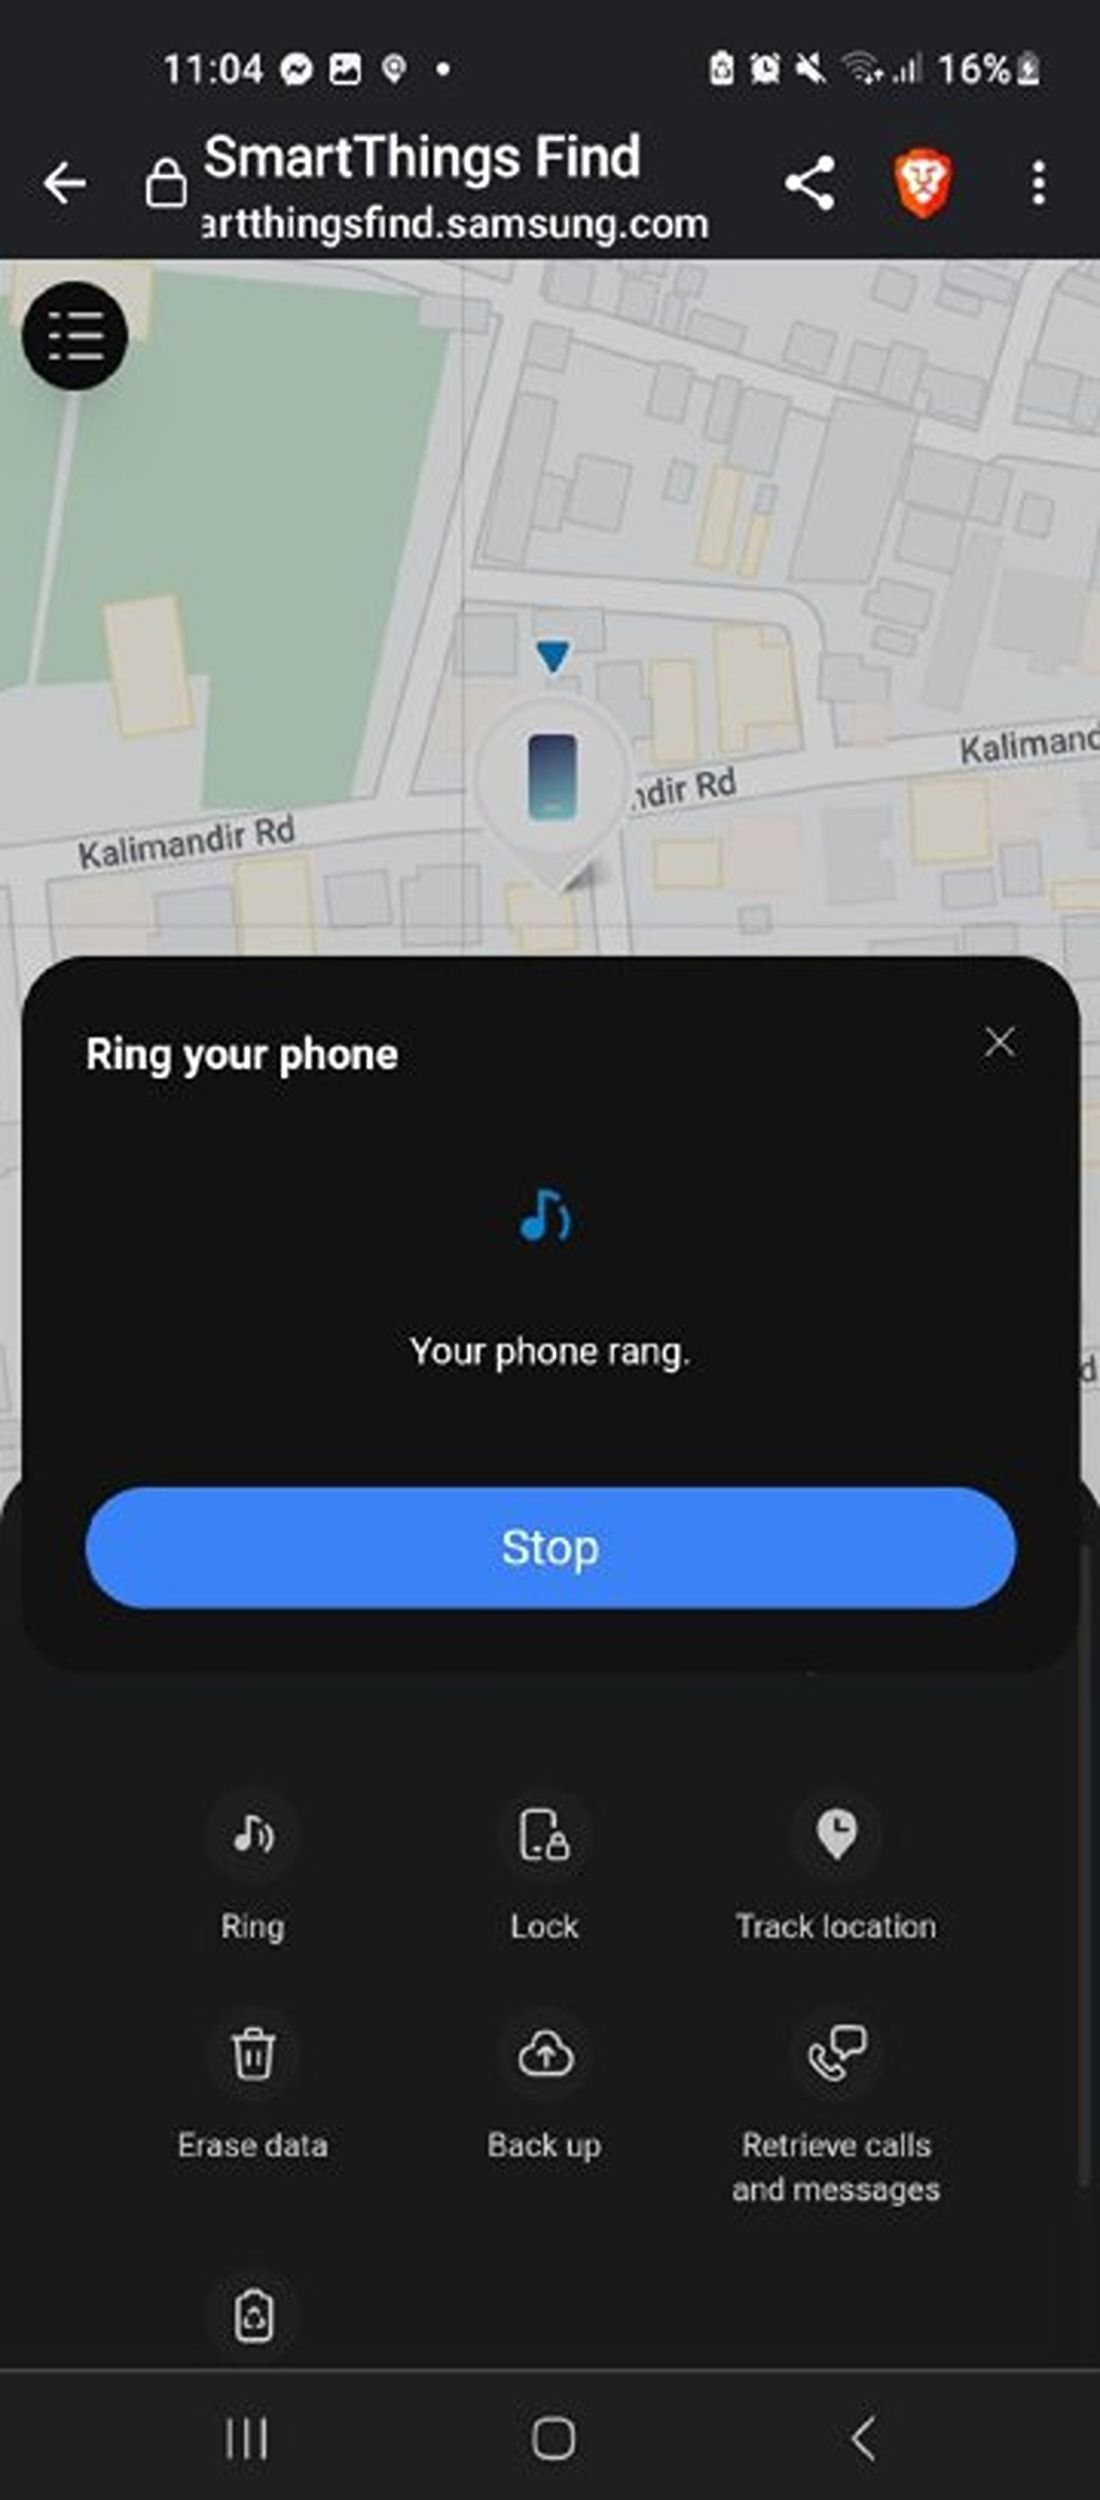 Using Ring functionality in Samsung SmartThings to track phone